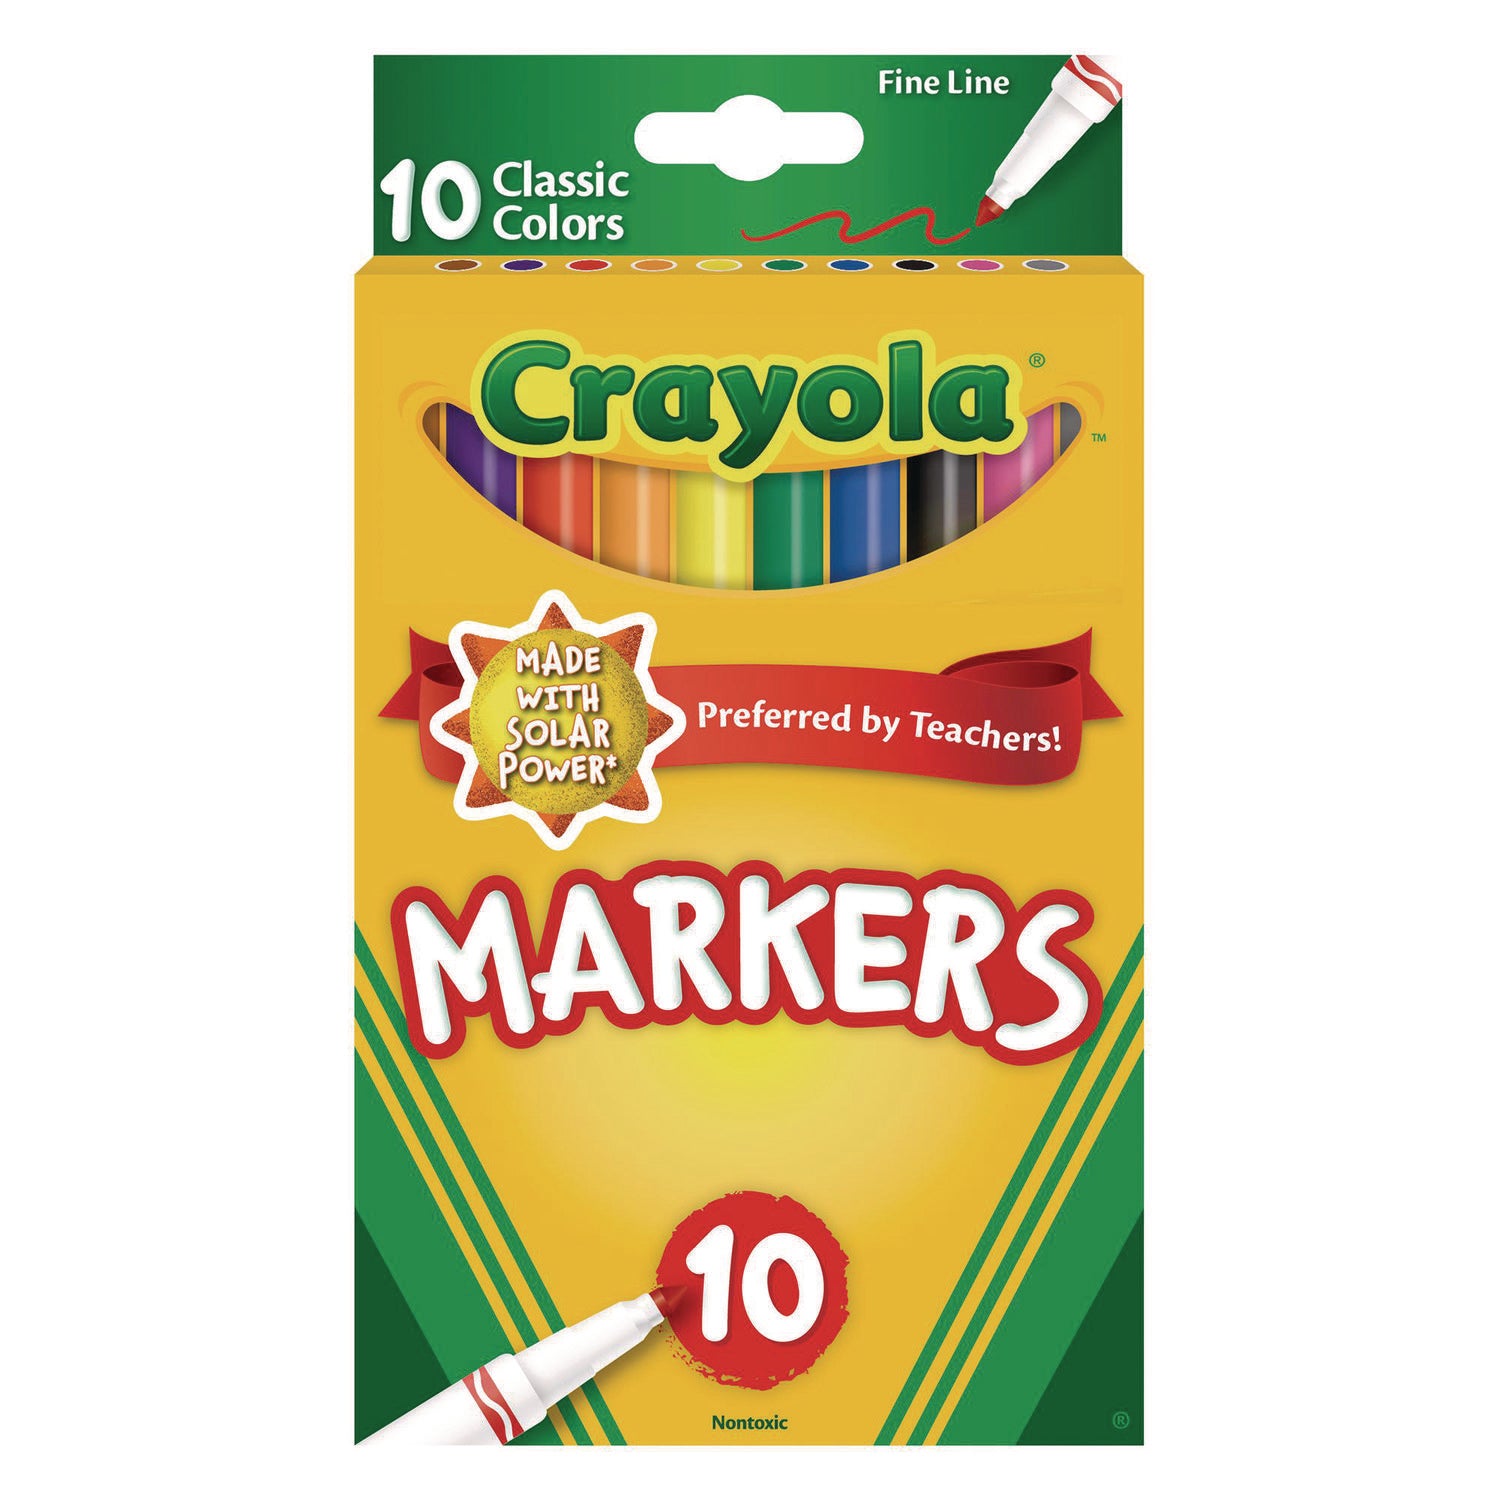 NON-WASHABLE MARKER, FINE BULLET TIP, ASSORTED CLASSIC COLORS, 10/PACK - 1